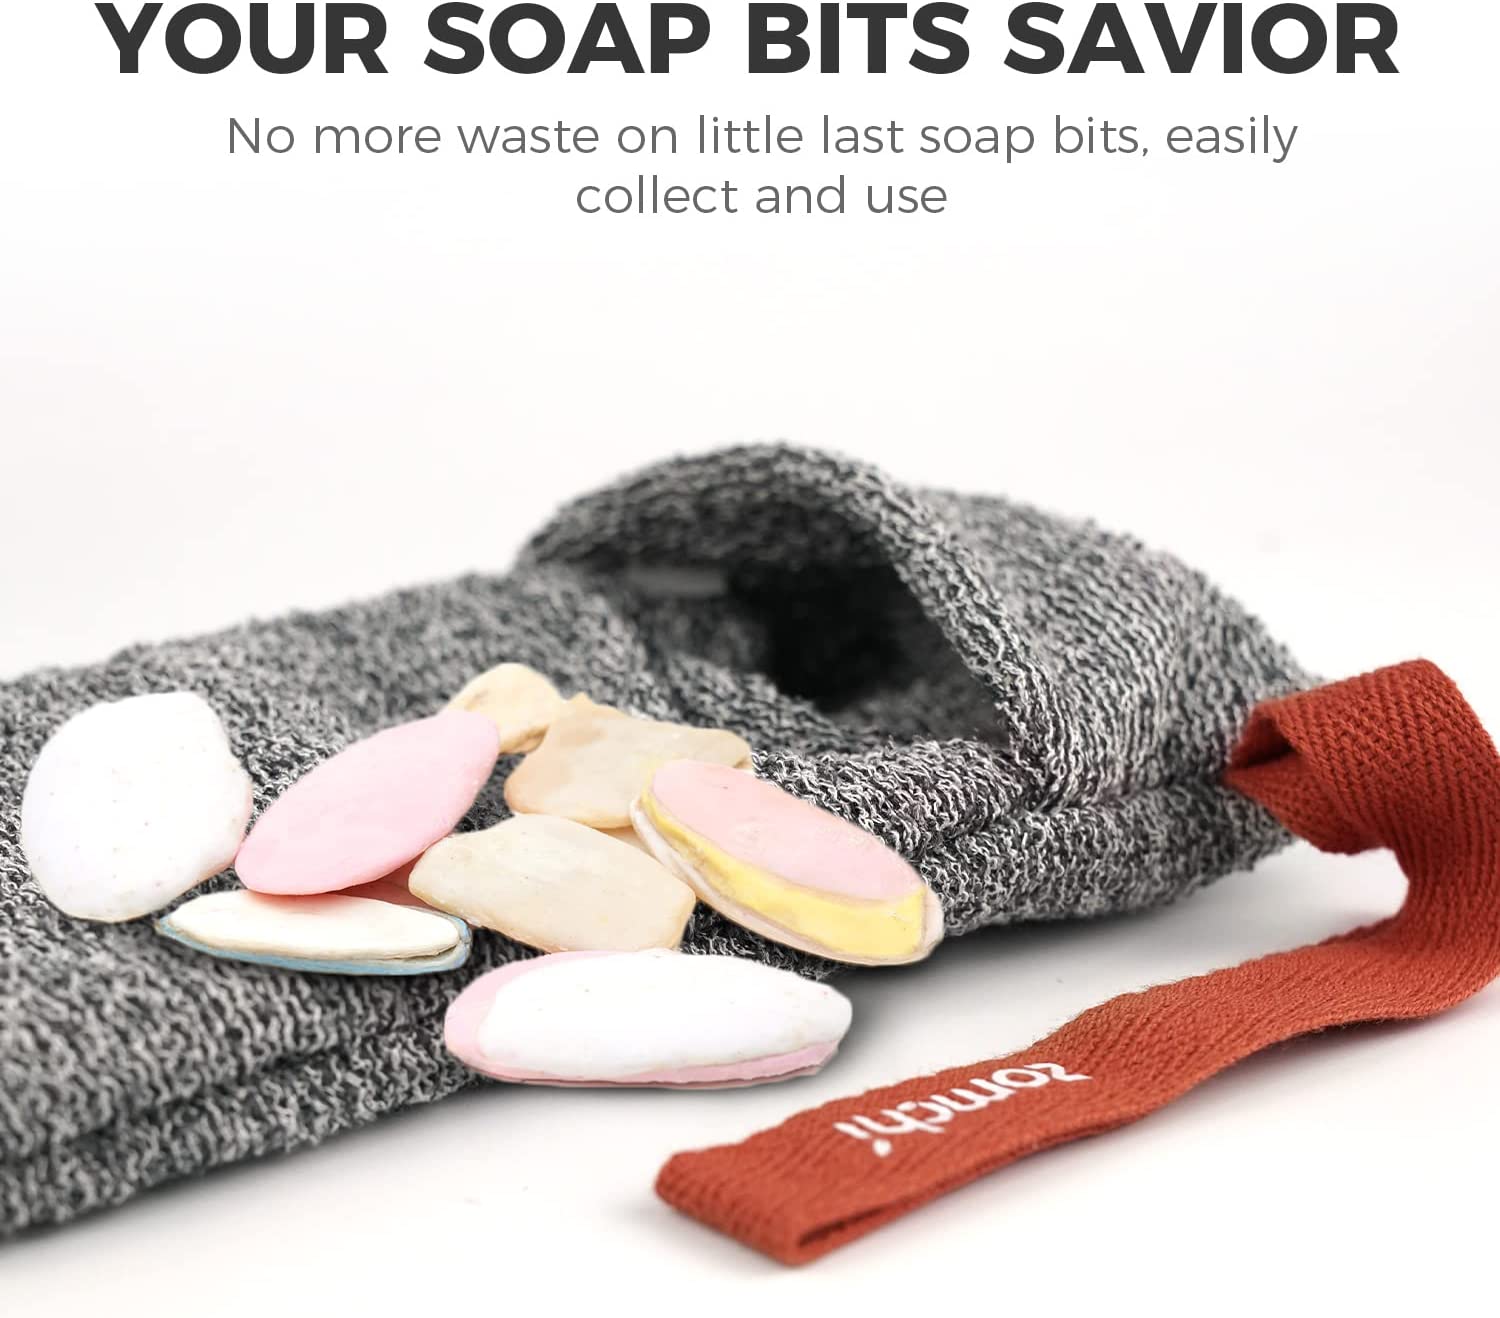 Exfoliating Soap Pouch And Soap Saver Pocket Easily Collect And Use Little Last Soap Bits Which No More Waste Your Soap